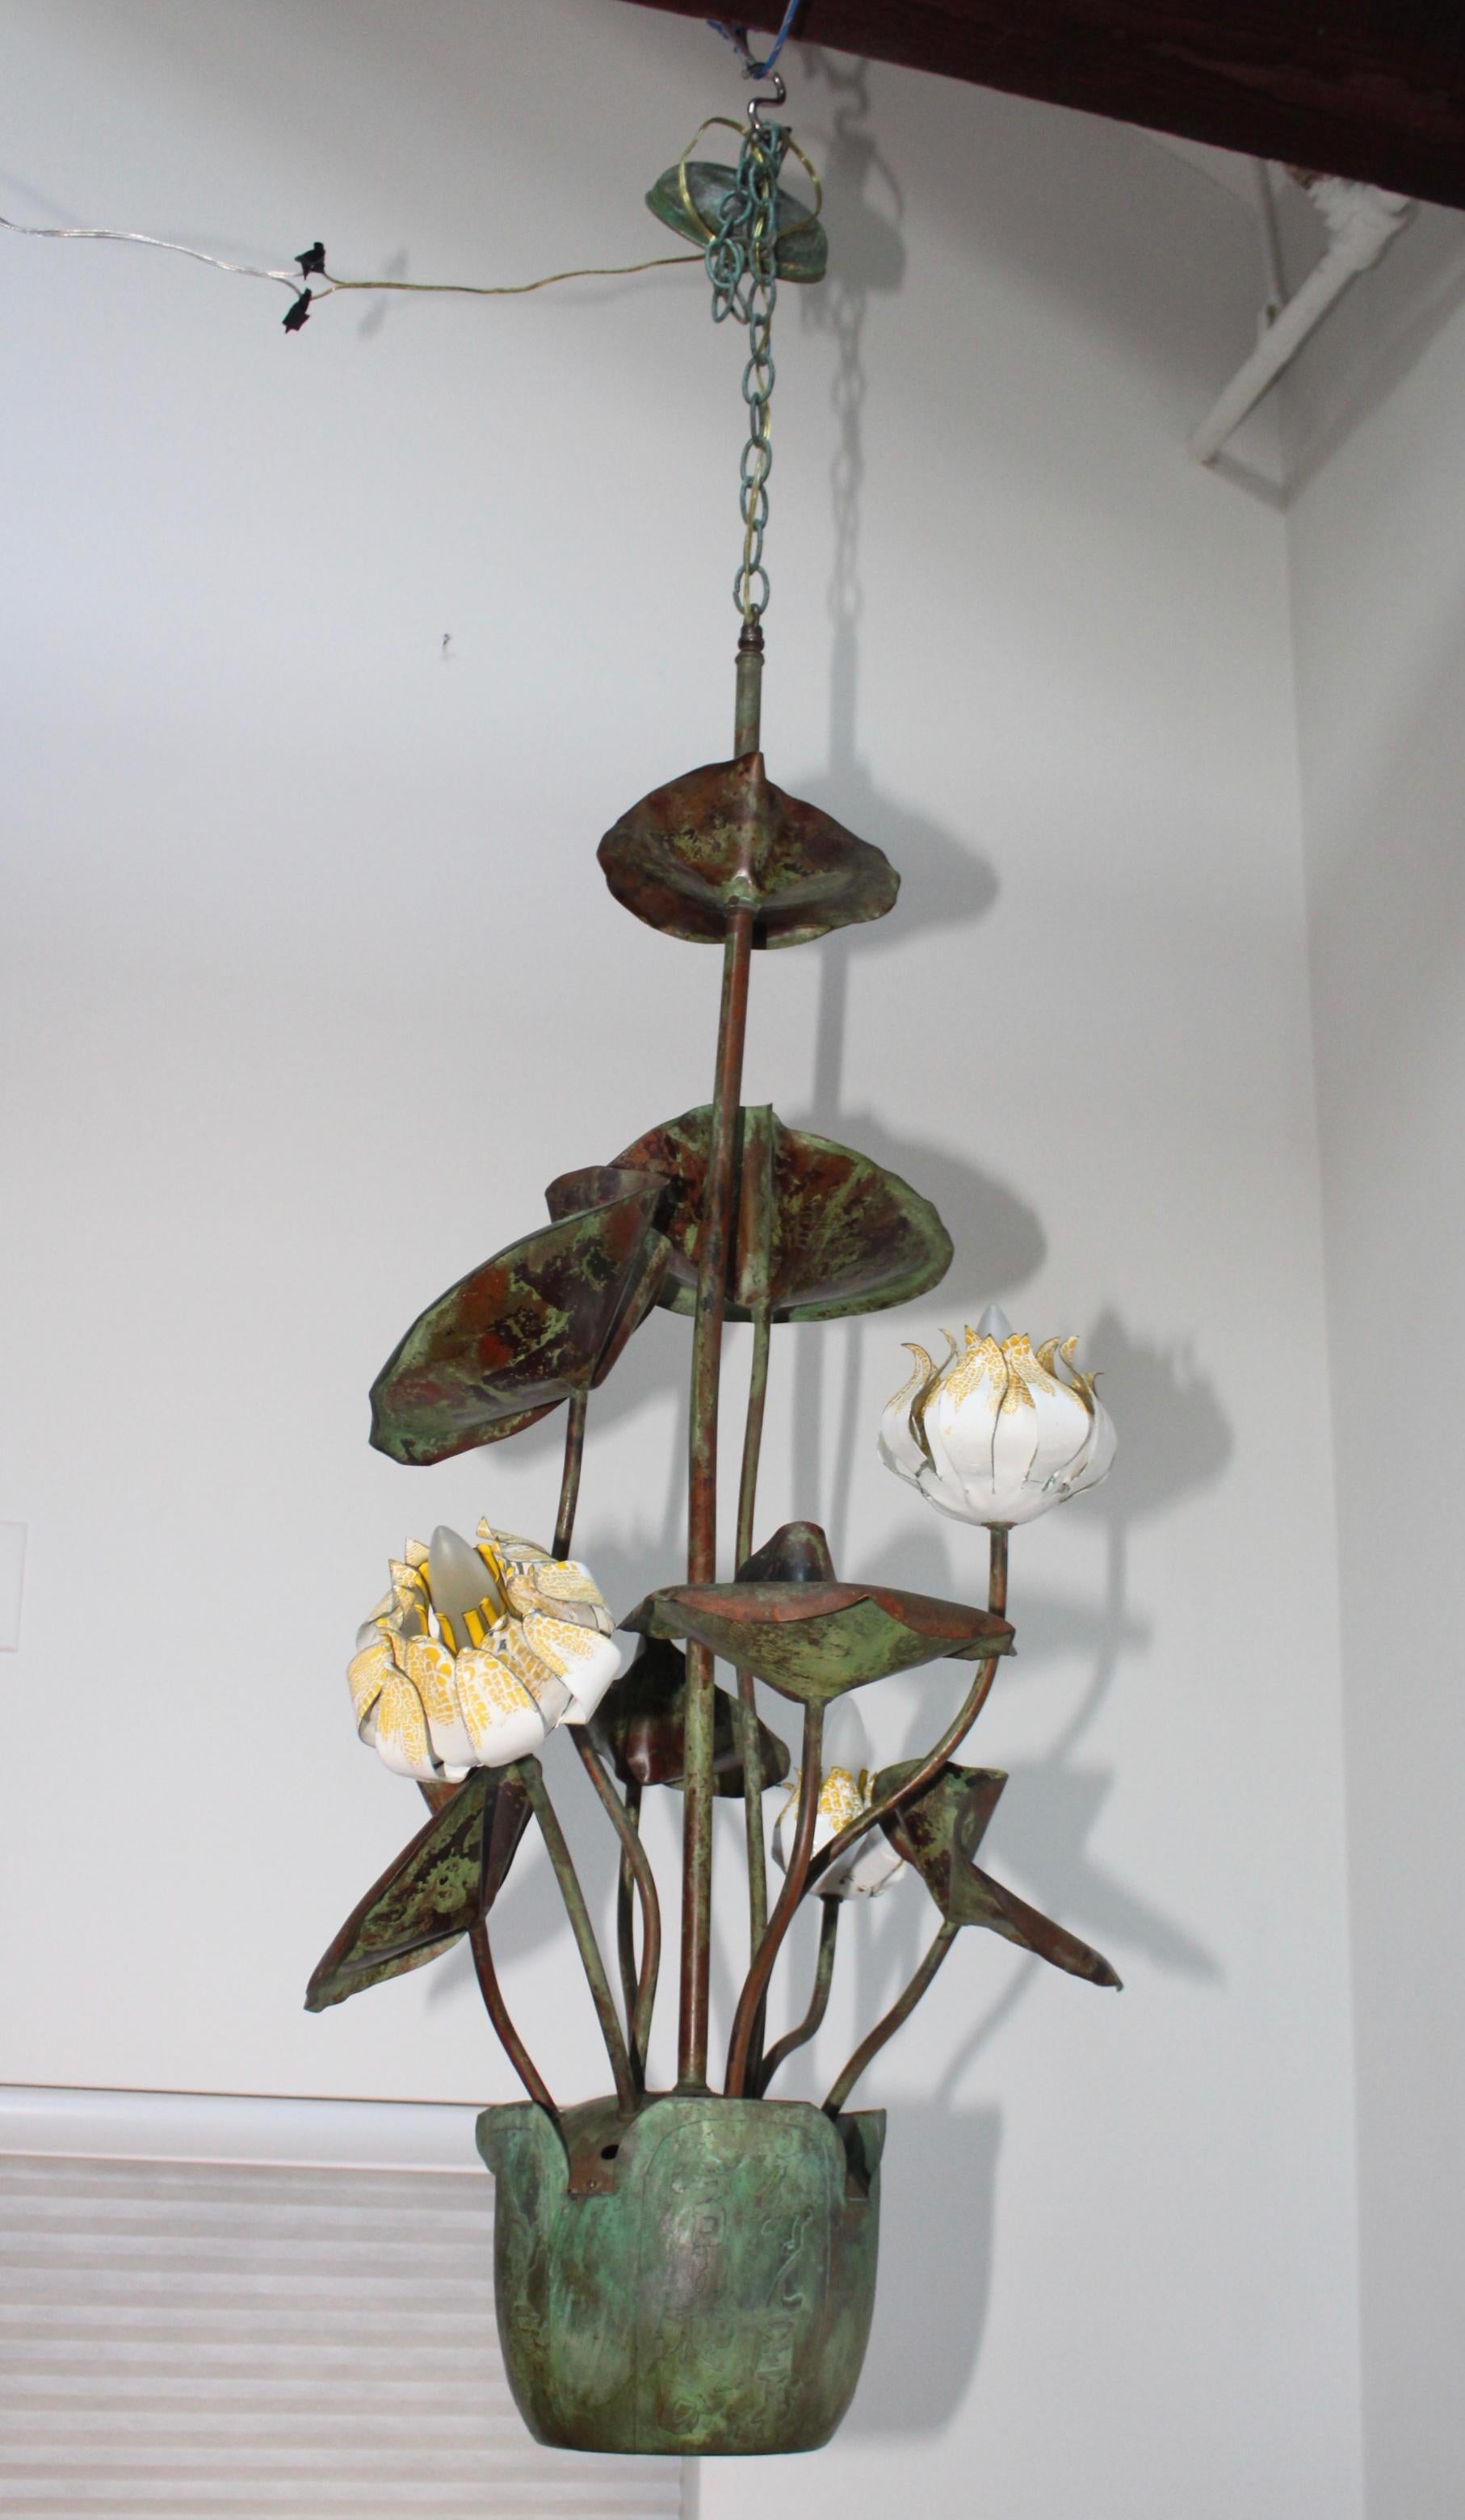 1984 bronze and copper chandelier designed by Garland Faulkner, in vintage original condition with some wear and patina, there is a bent to the bottom (see last picture)

Total height including chain 98” chain height can be adjusted.